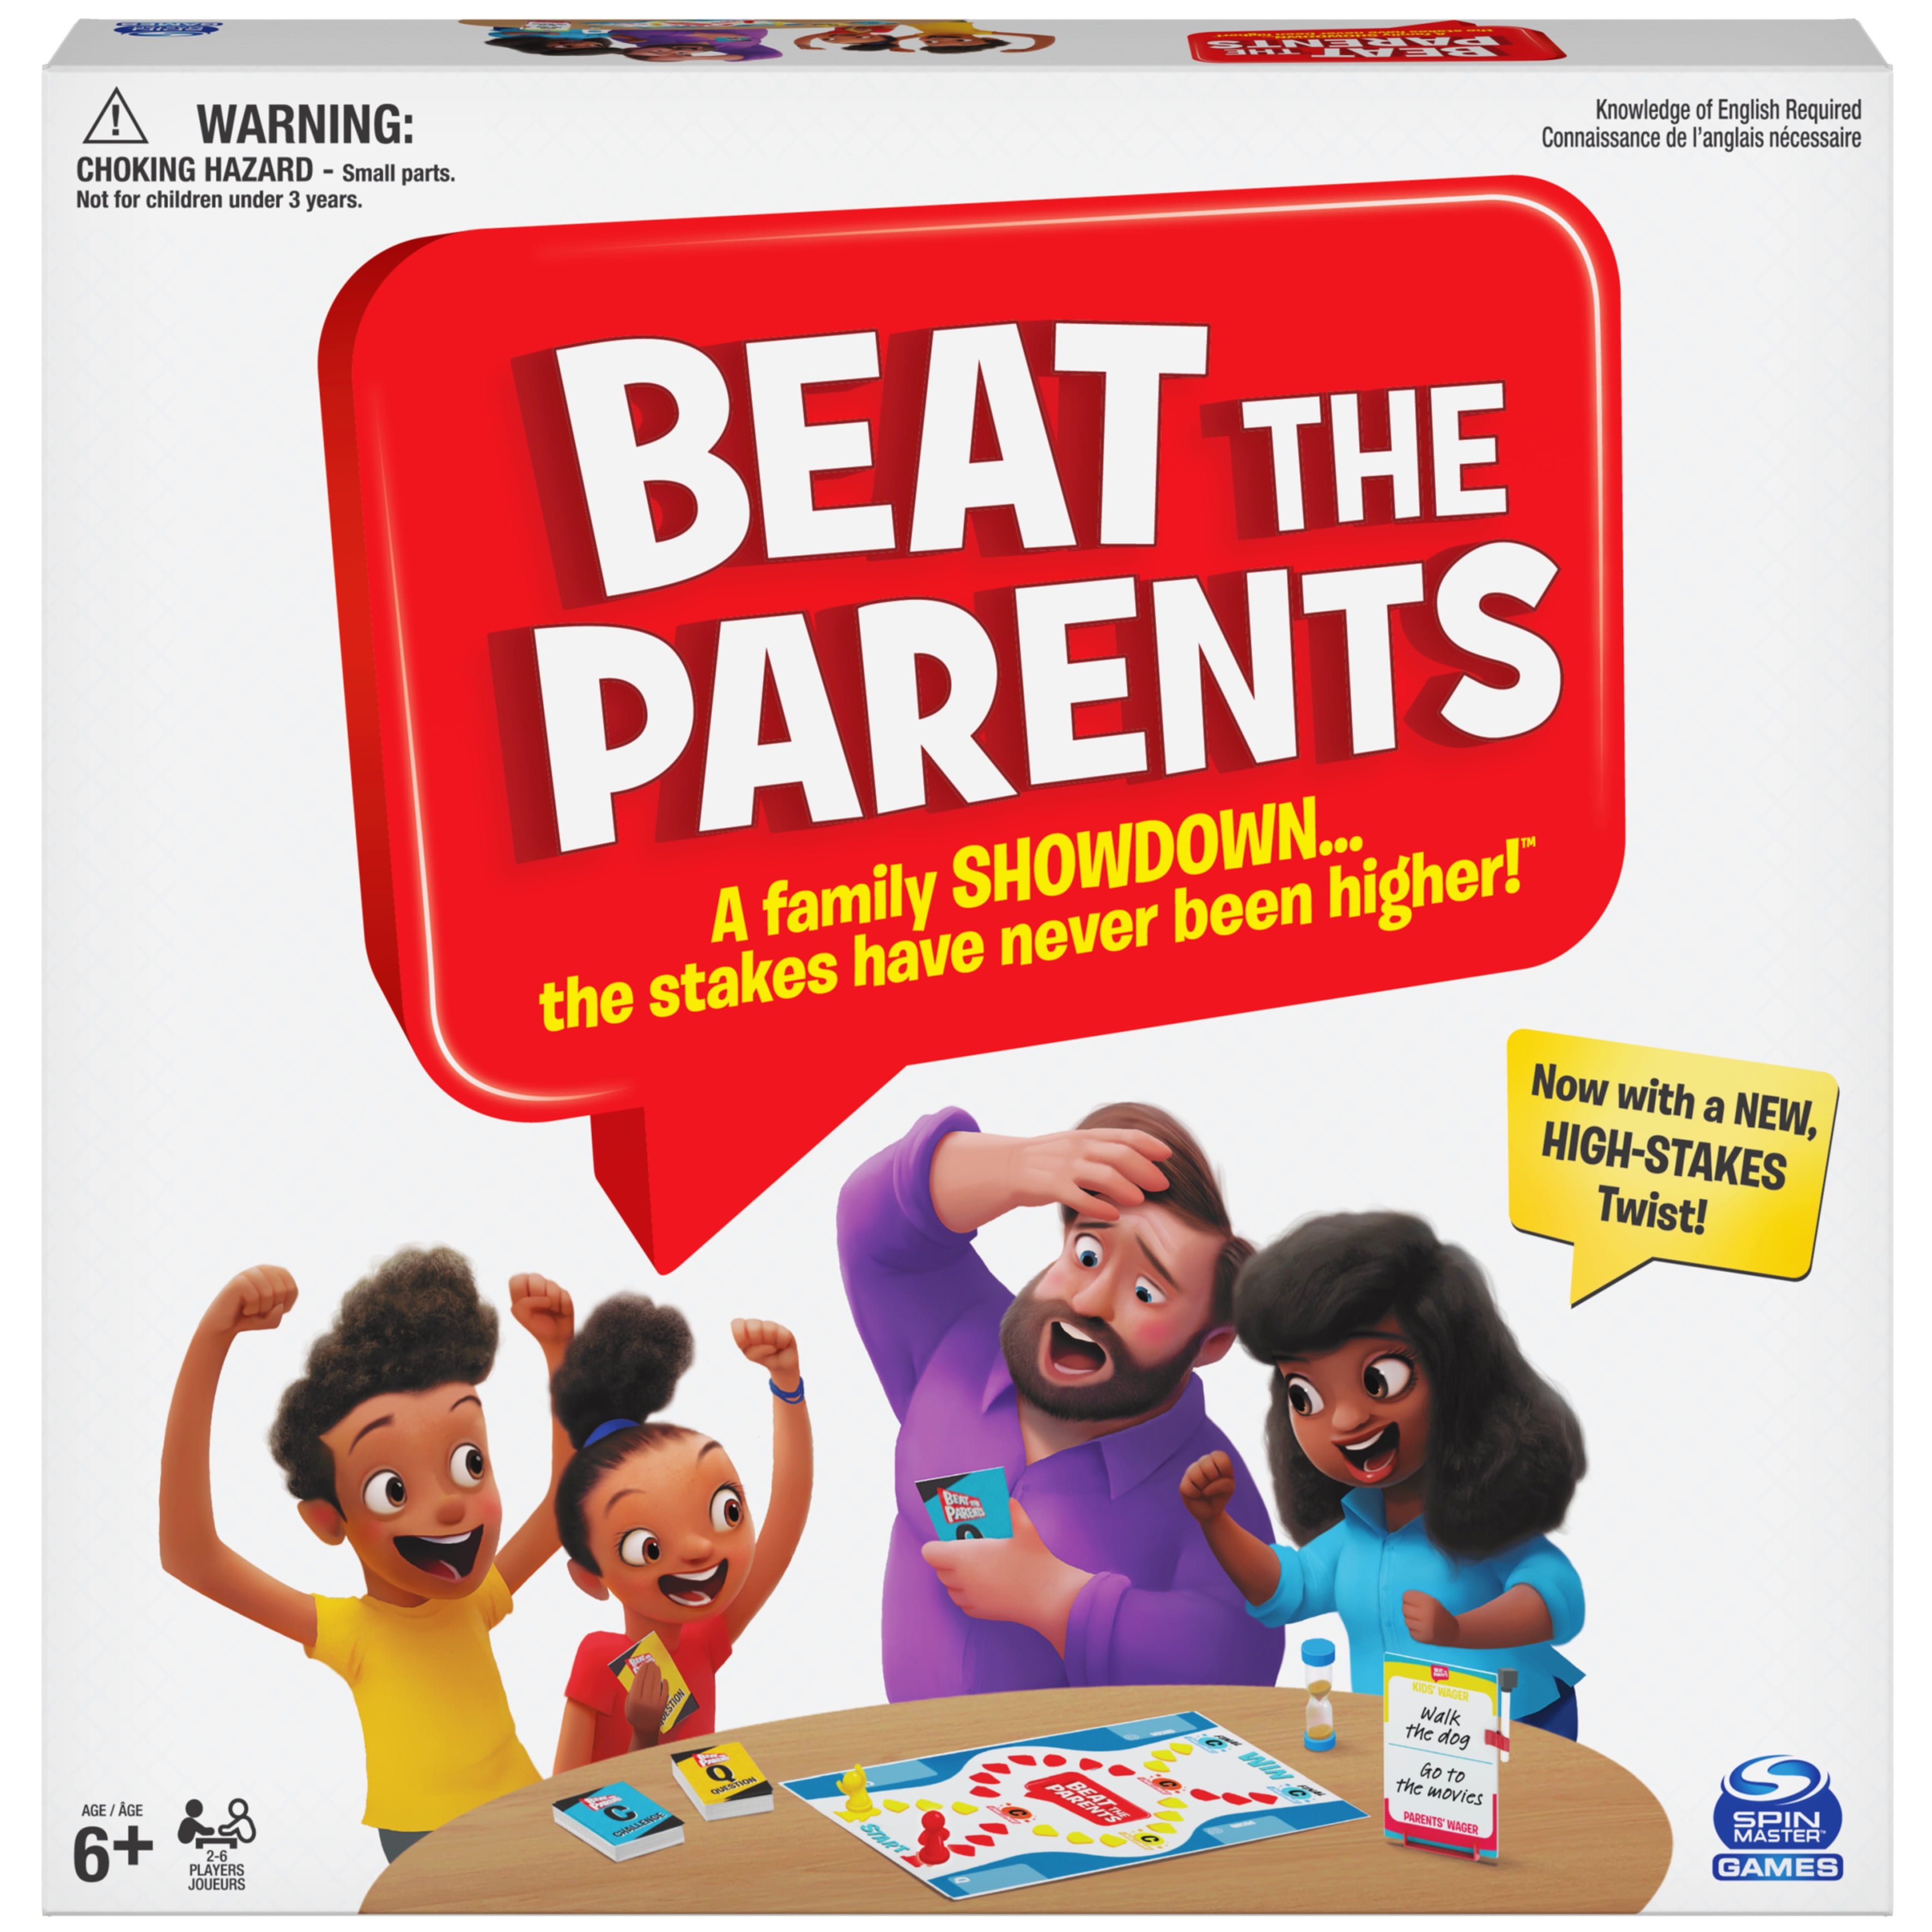 10 AWARD WINNING Family Games and how they stand the test of time. 